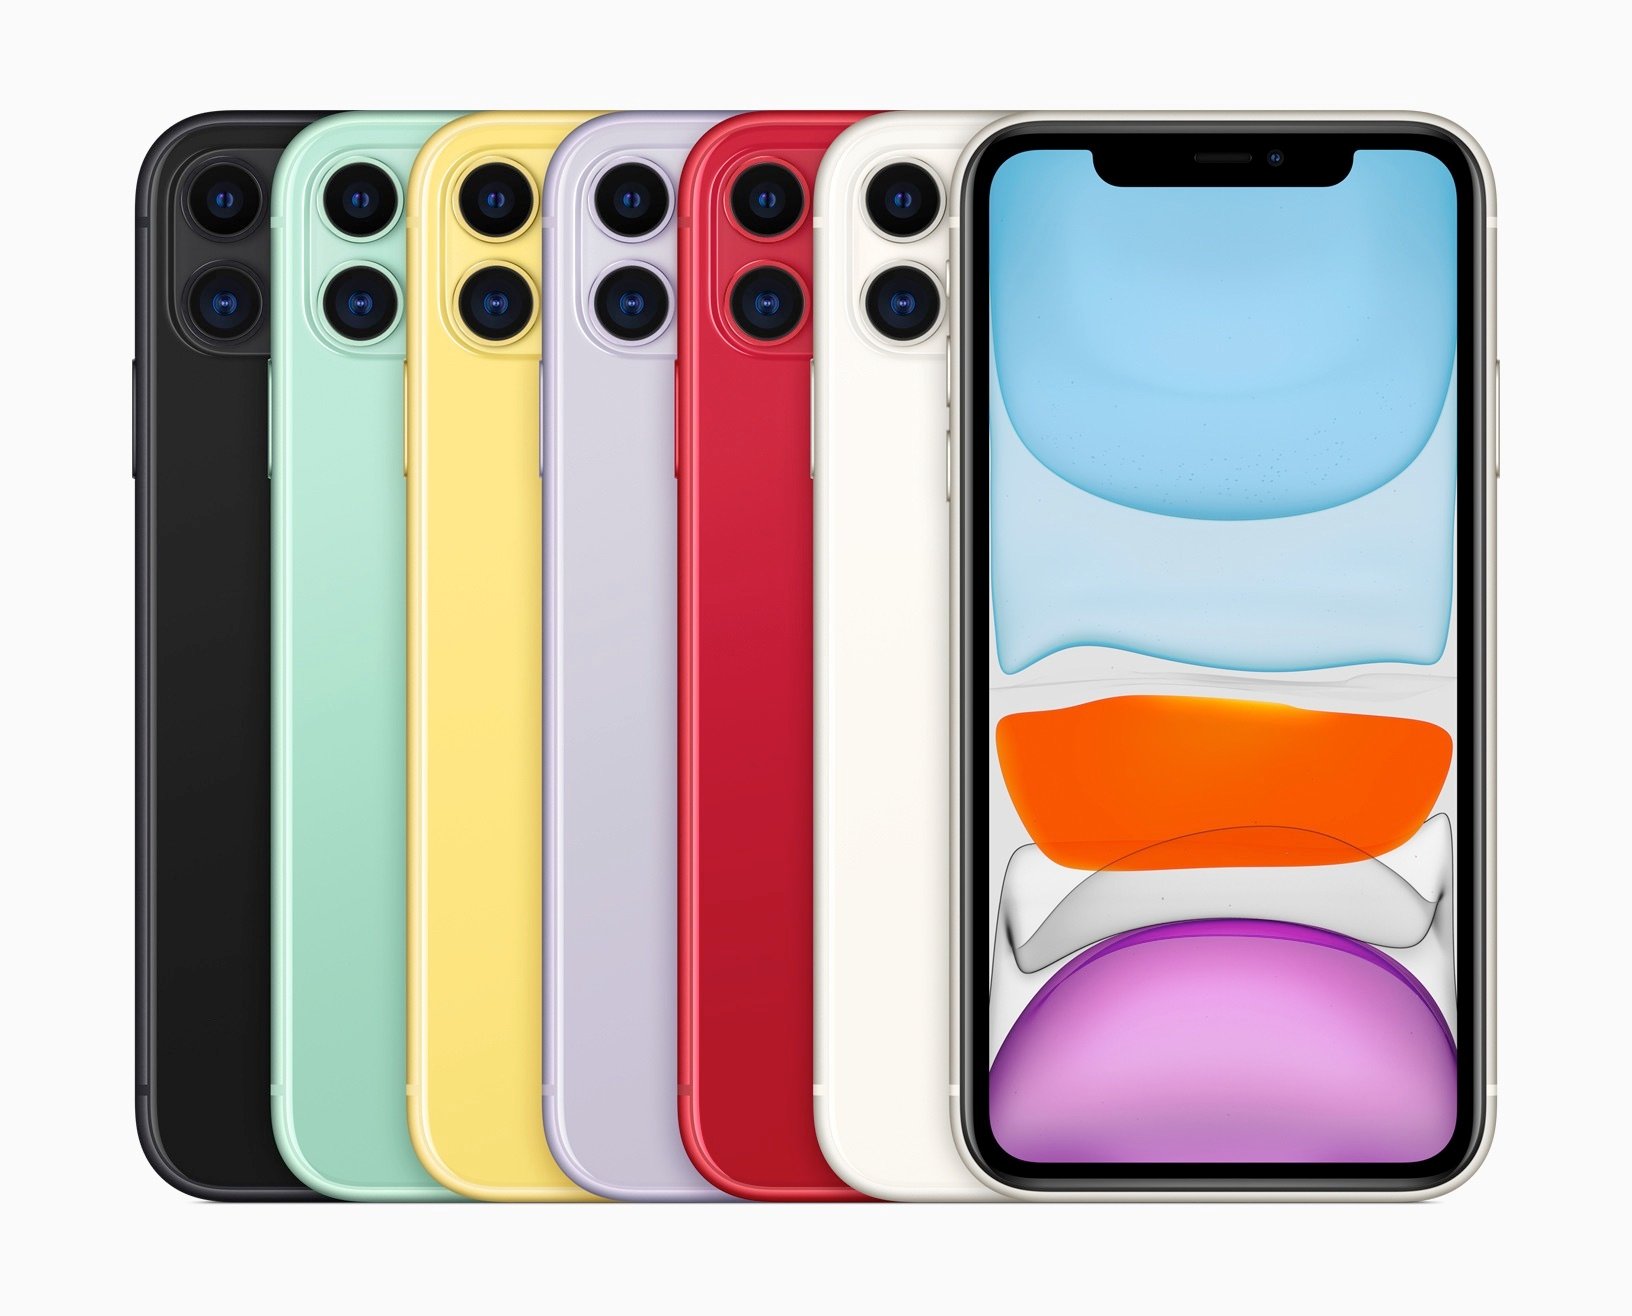 Apple iPhone 11 featured